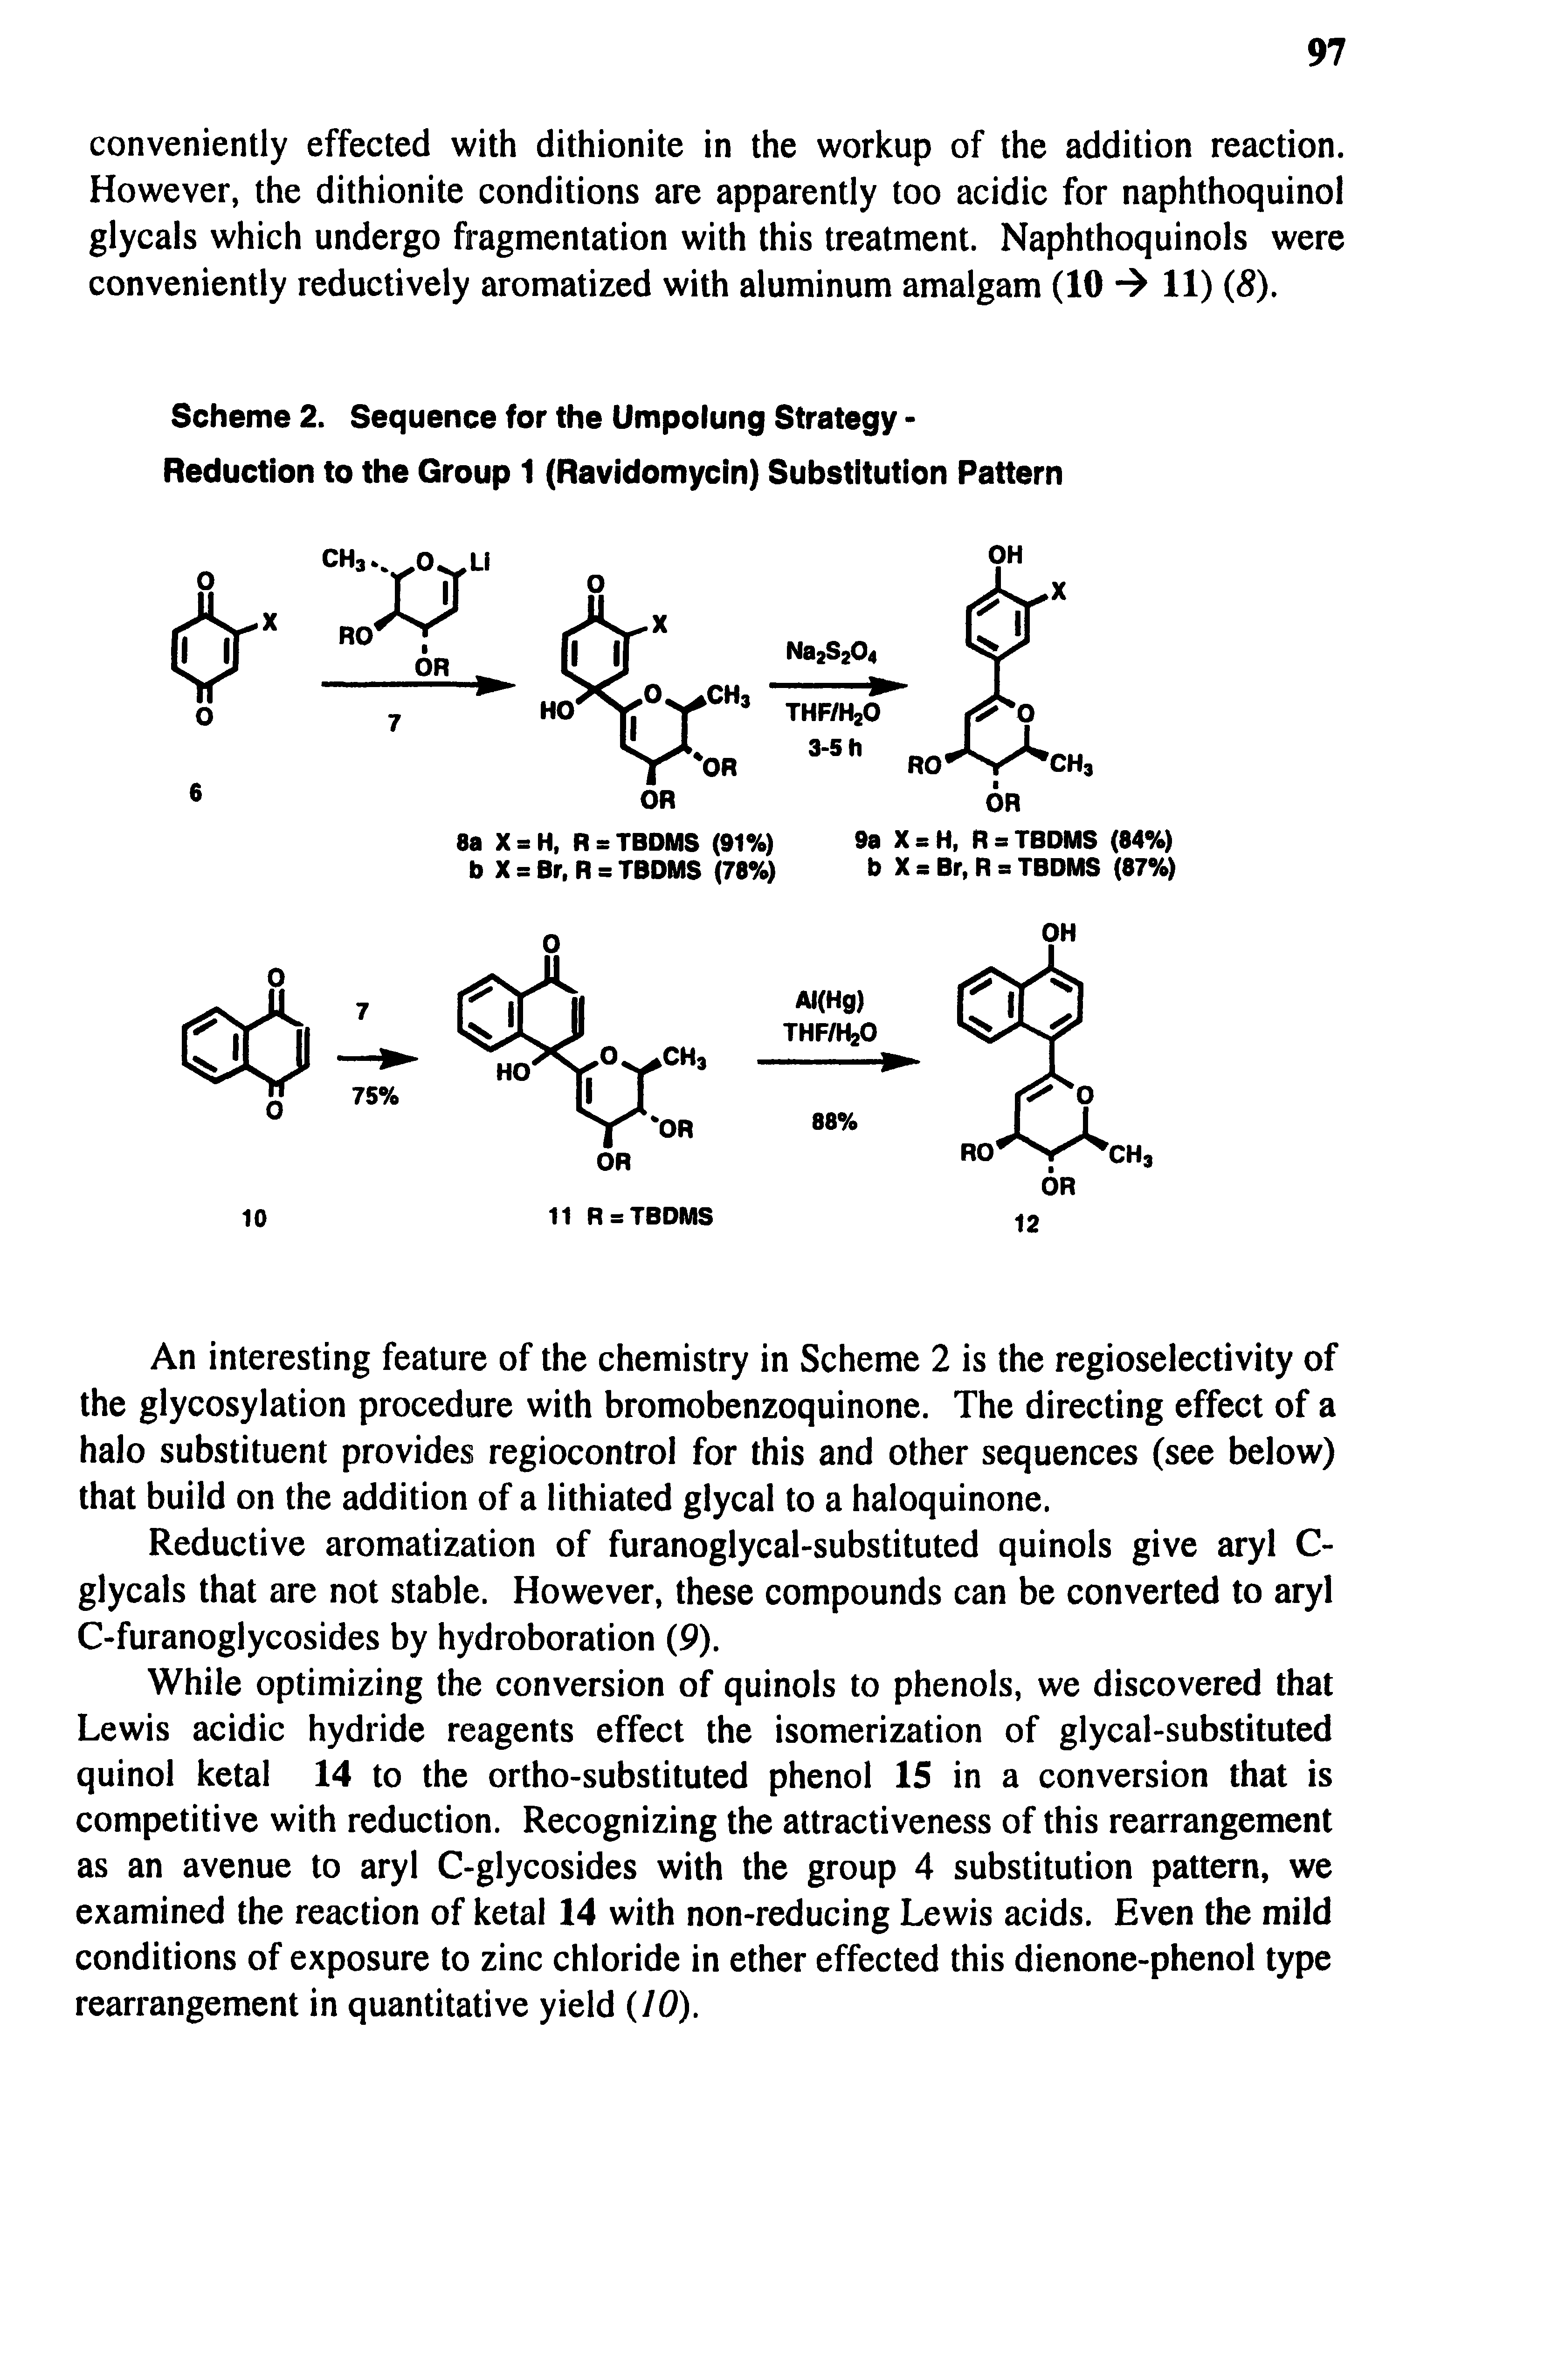 Scheme 2. Sequence for the Umpolung Strategy -Reduction to the Group 1 (Ravidomycin) Substitution Pattern...